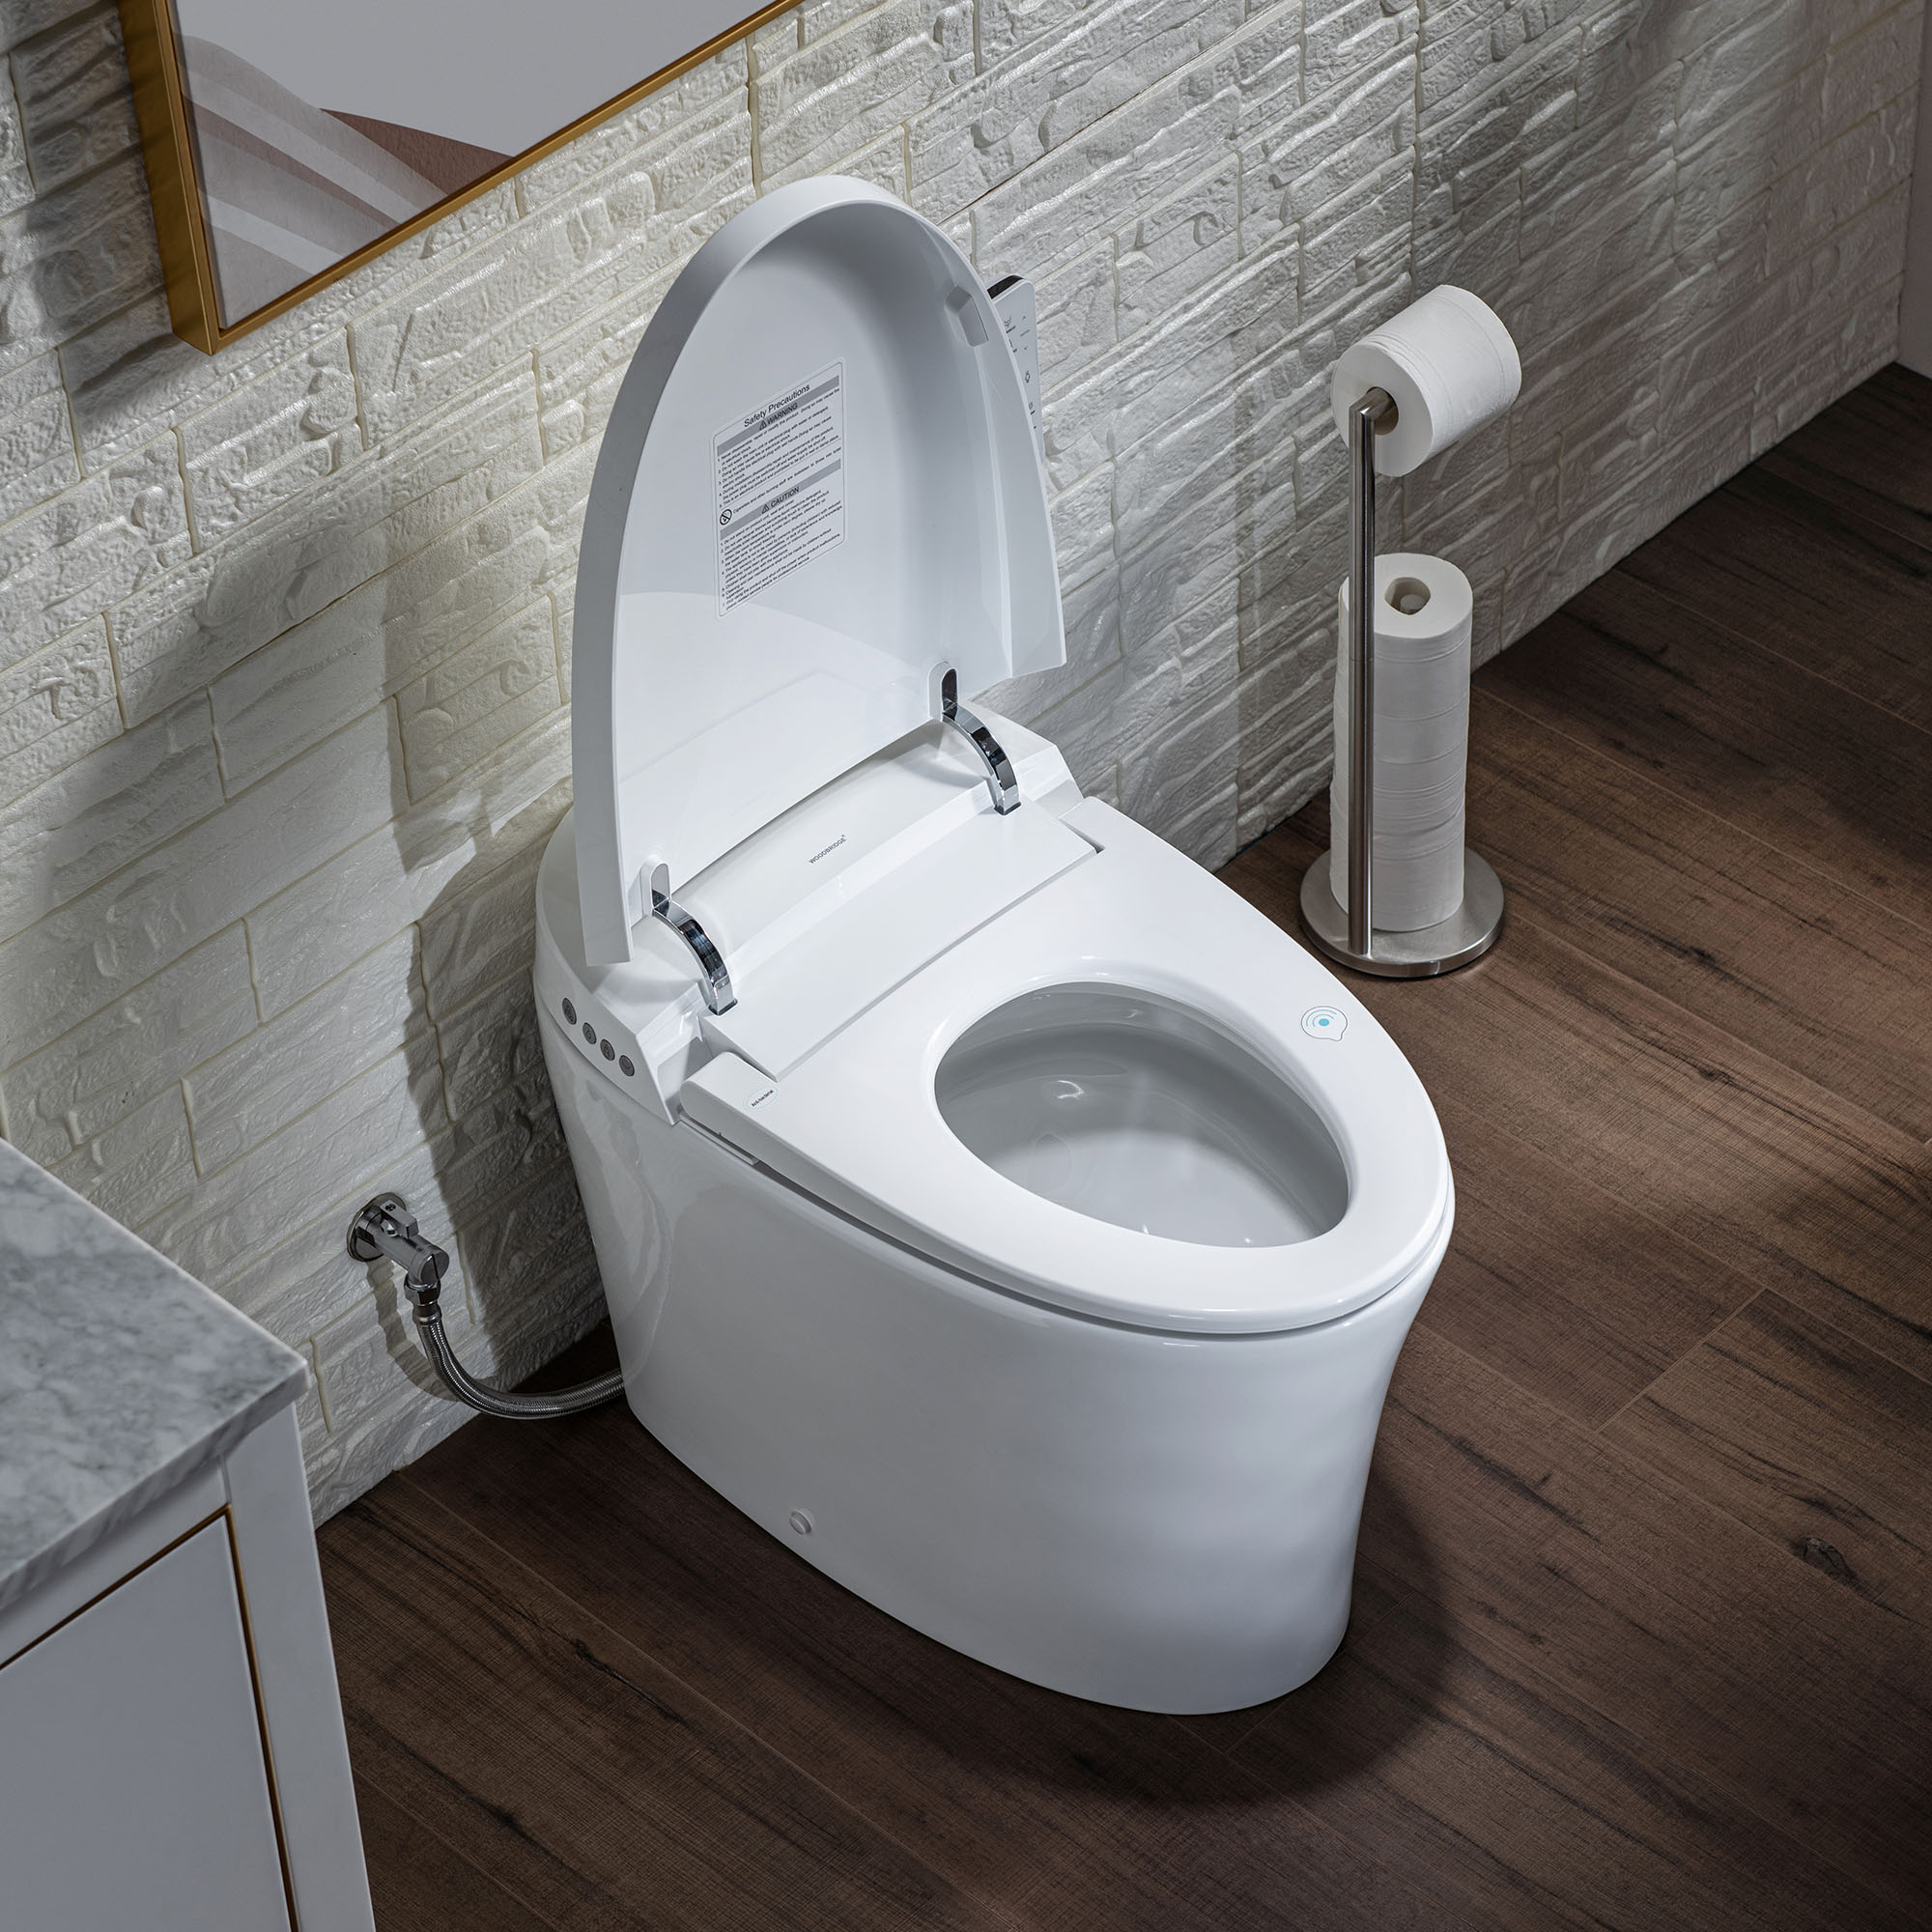  WOODBRIDGE B0970S Smart Bidet Tankless Toilet Elongated One Piece Chair Height, Auto Flush, Foot Sensor Operation, Heated Seat with Integrated Multi Function Remote Control in White_12171